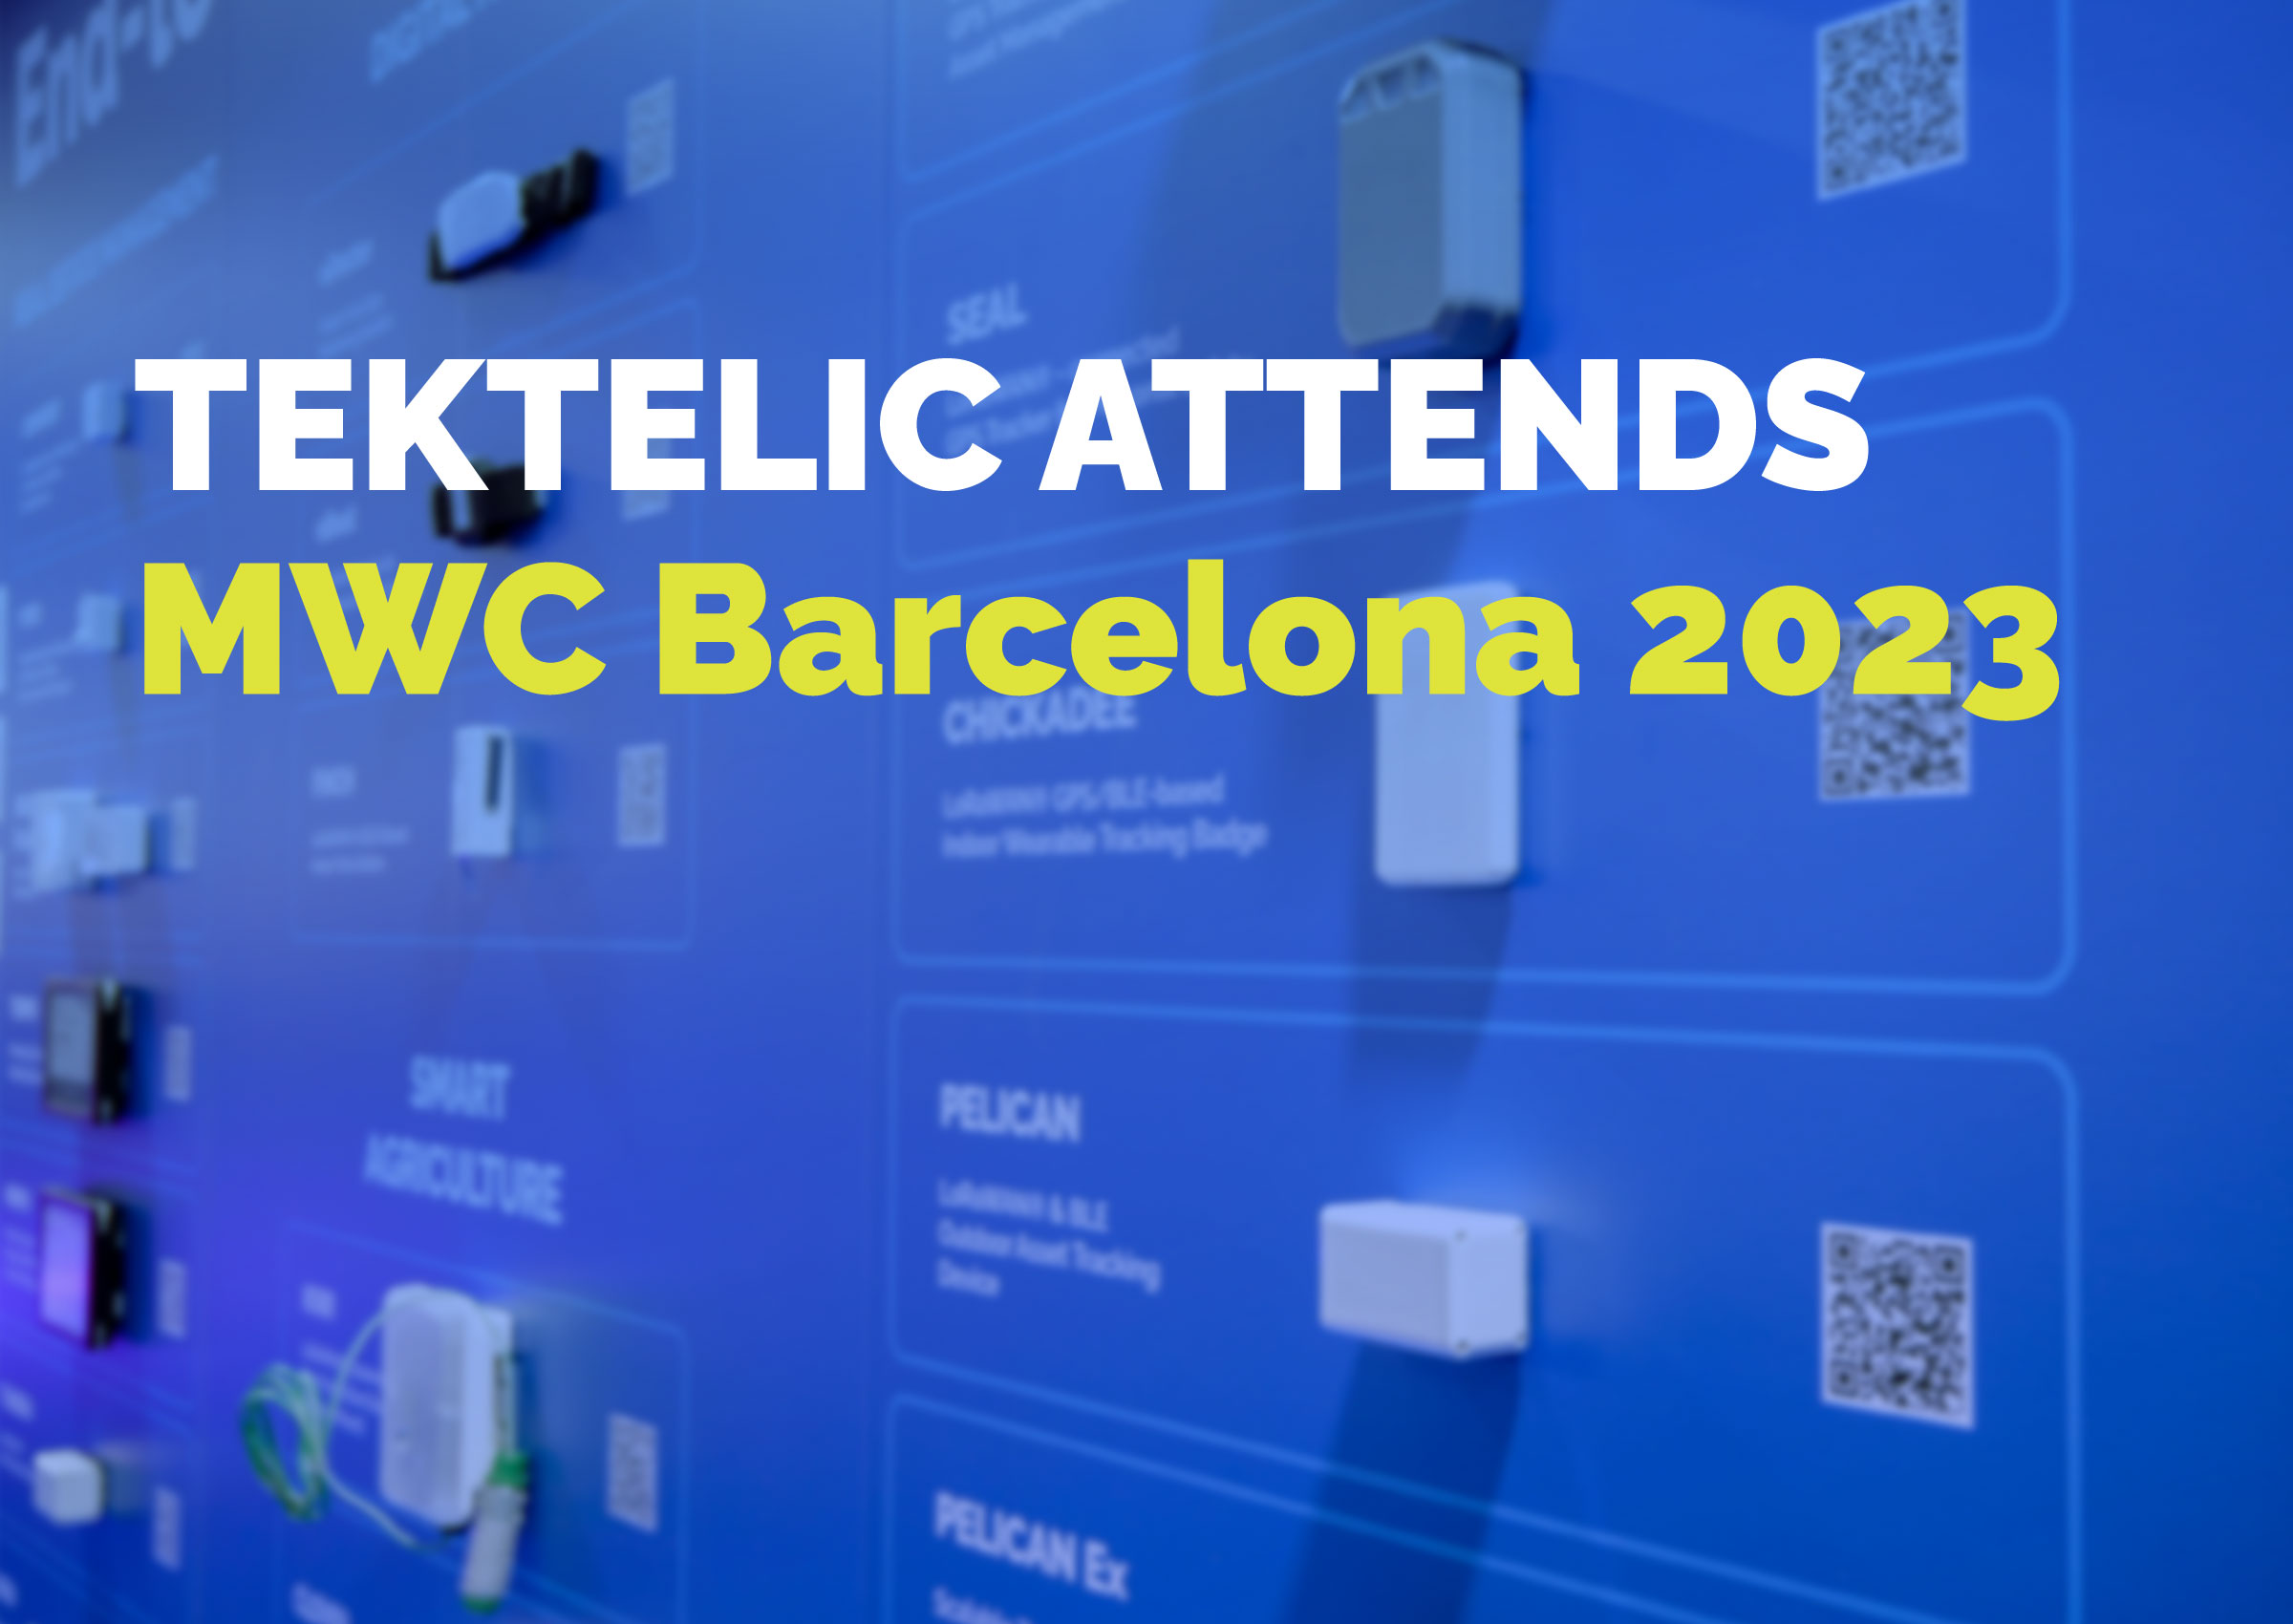 TEKTELIC presented new products at MWC Barcelona 2023